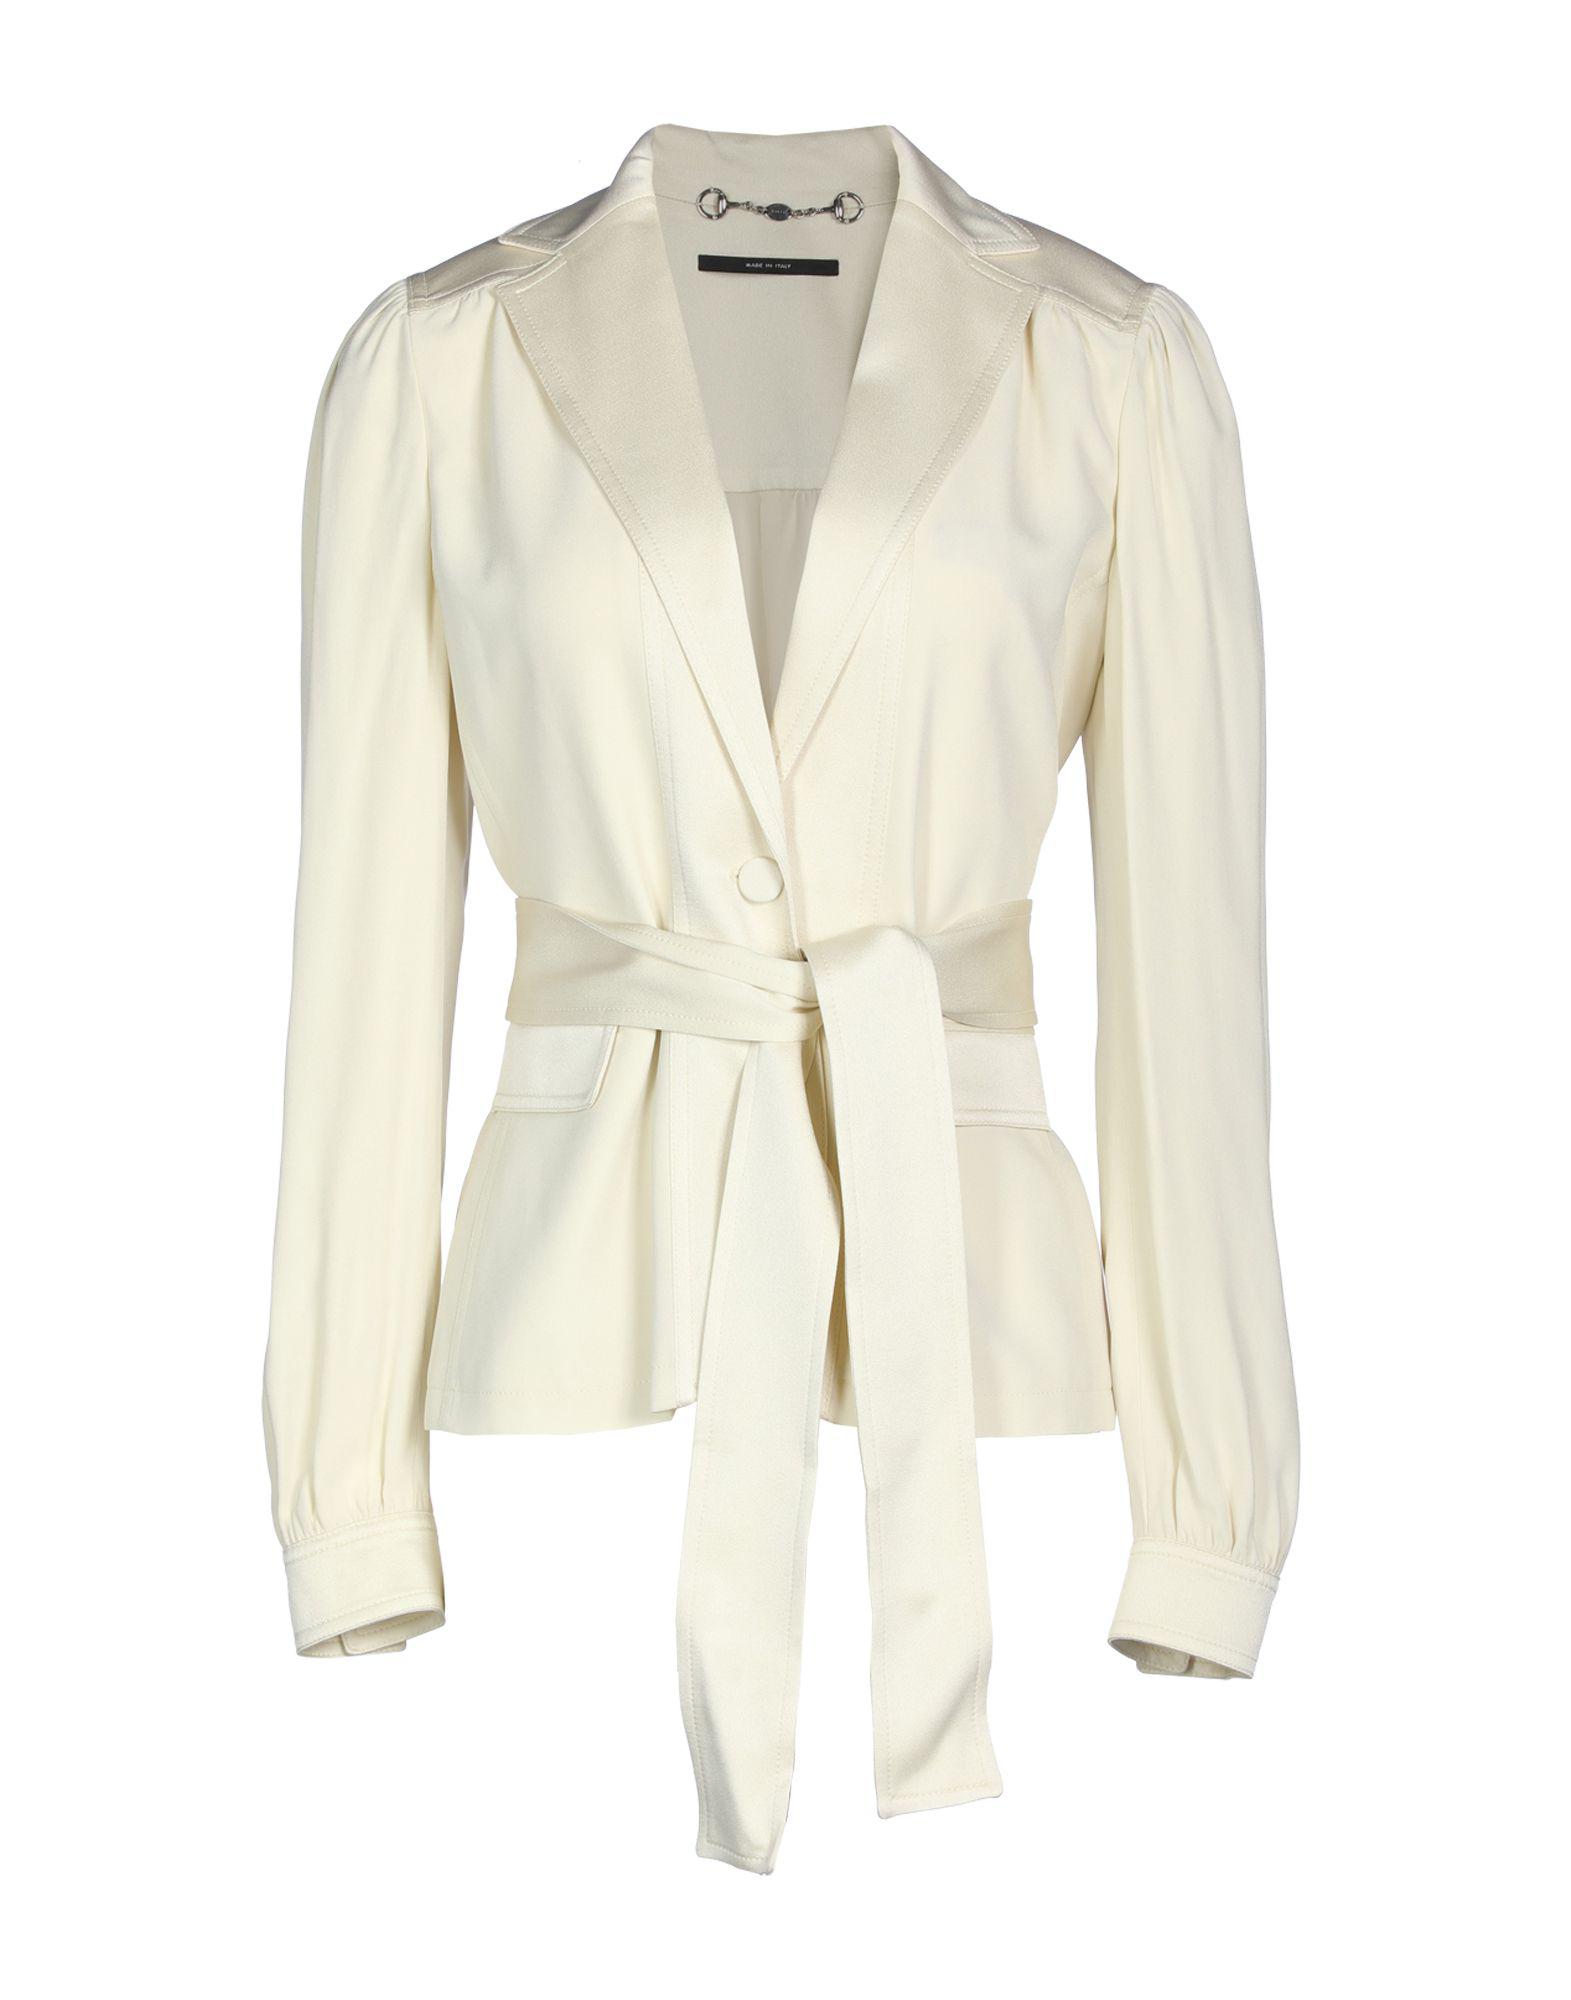 Gucci Suit Jacket in Ivory (White) - Lyst